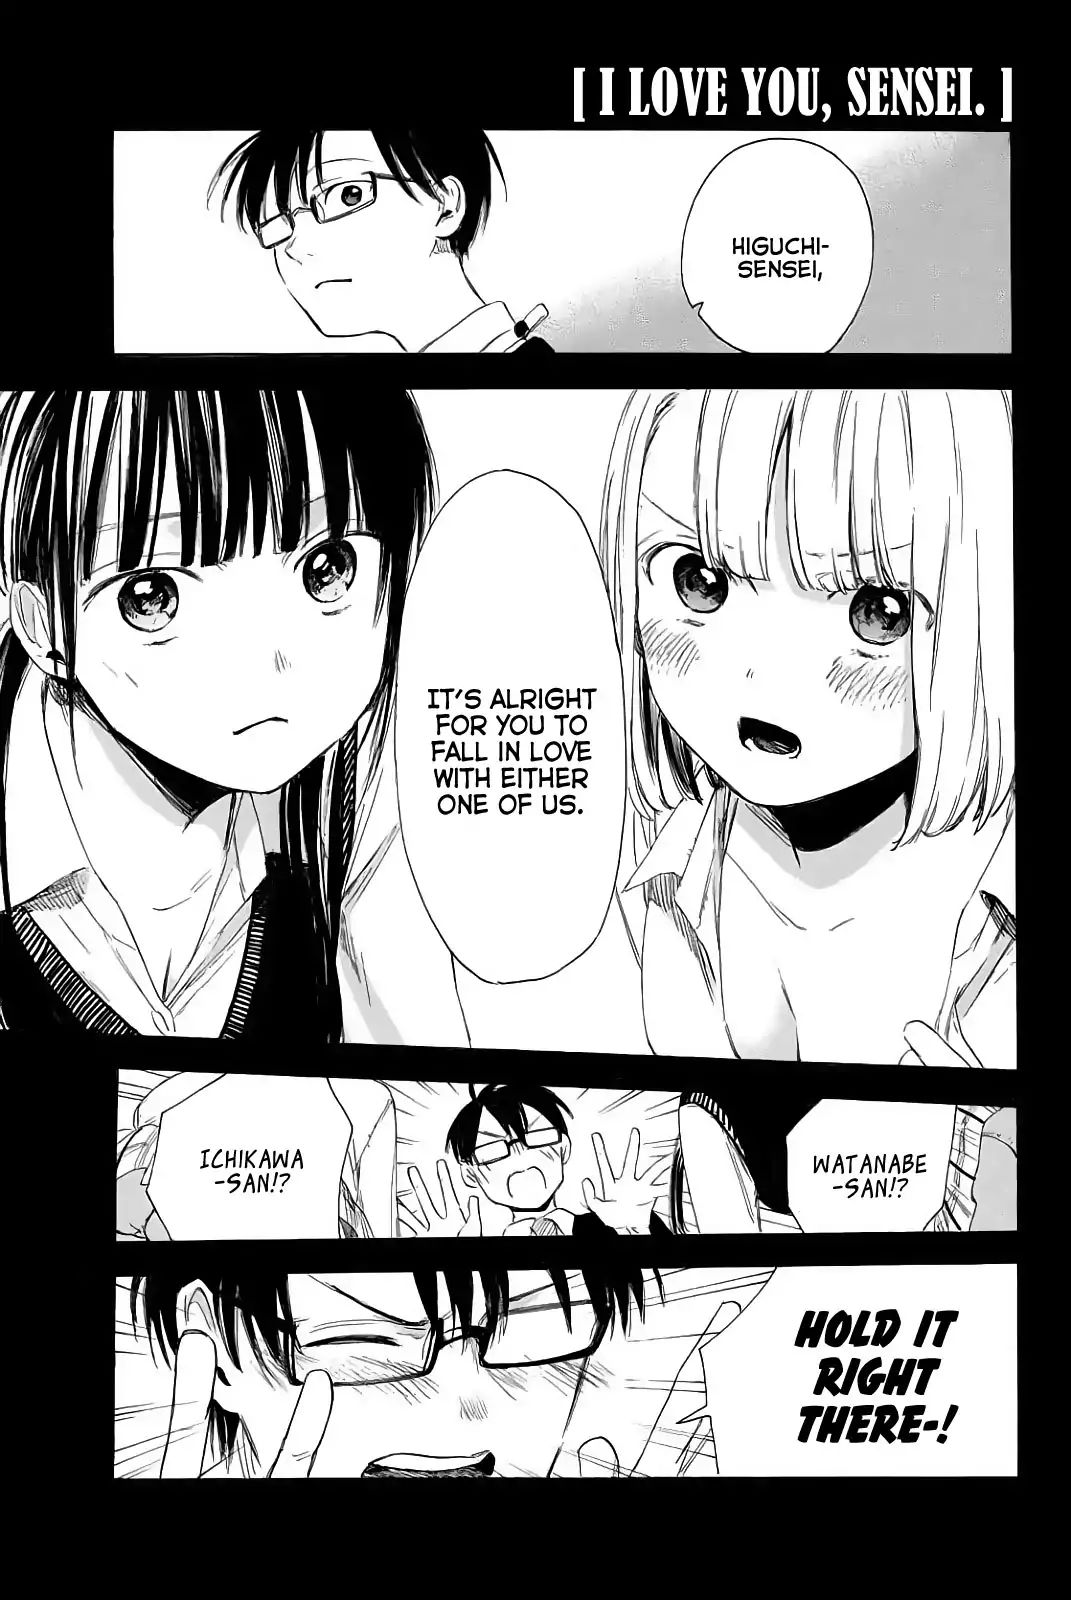 Sensei, Suki Desu. Chapter 3: Hiding And Staring At A Garden Filled With Girls, Is That What You Like Doing? - Picture 1